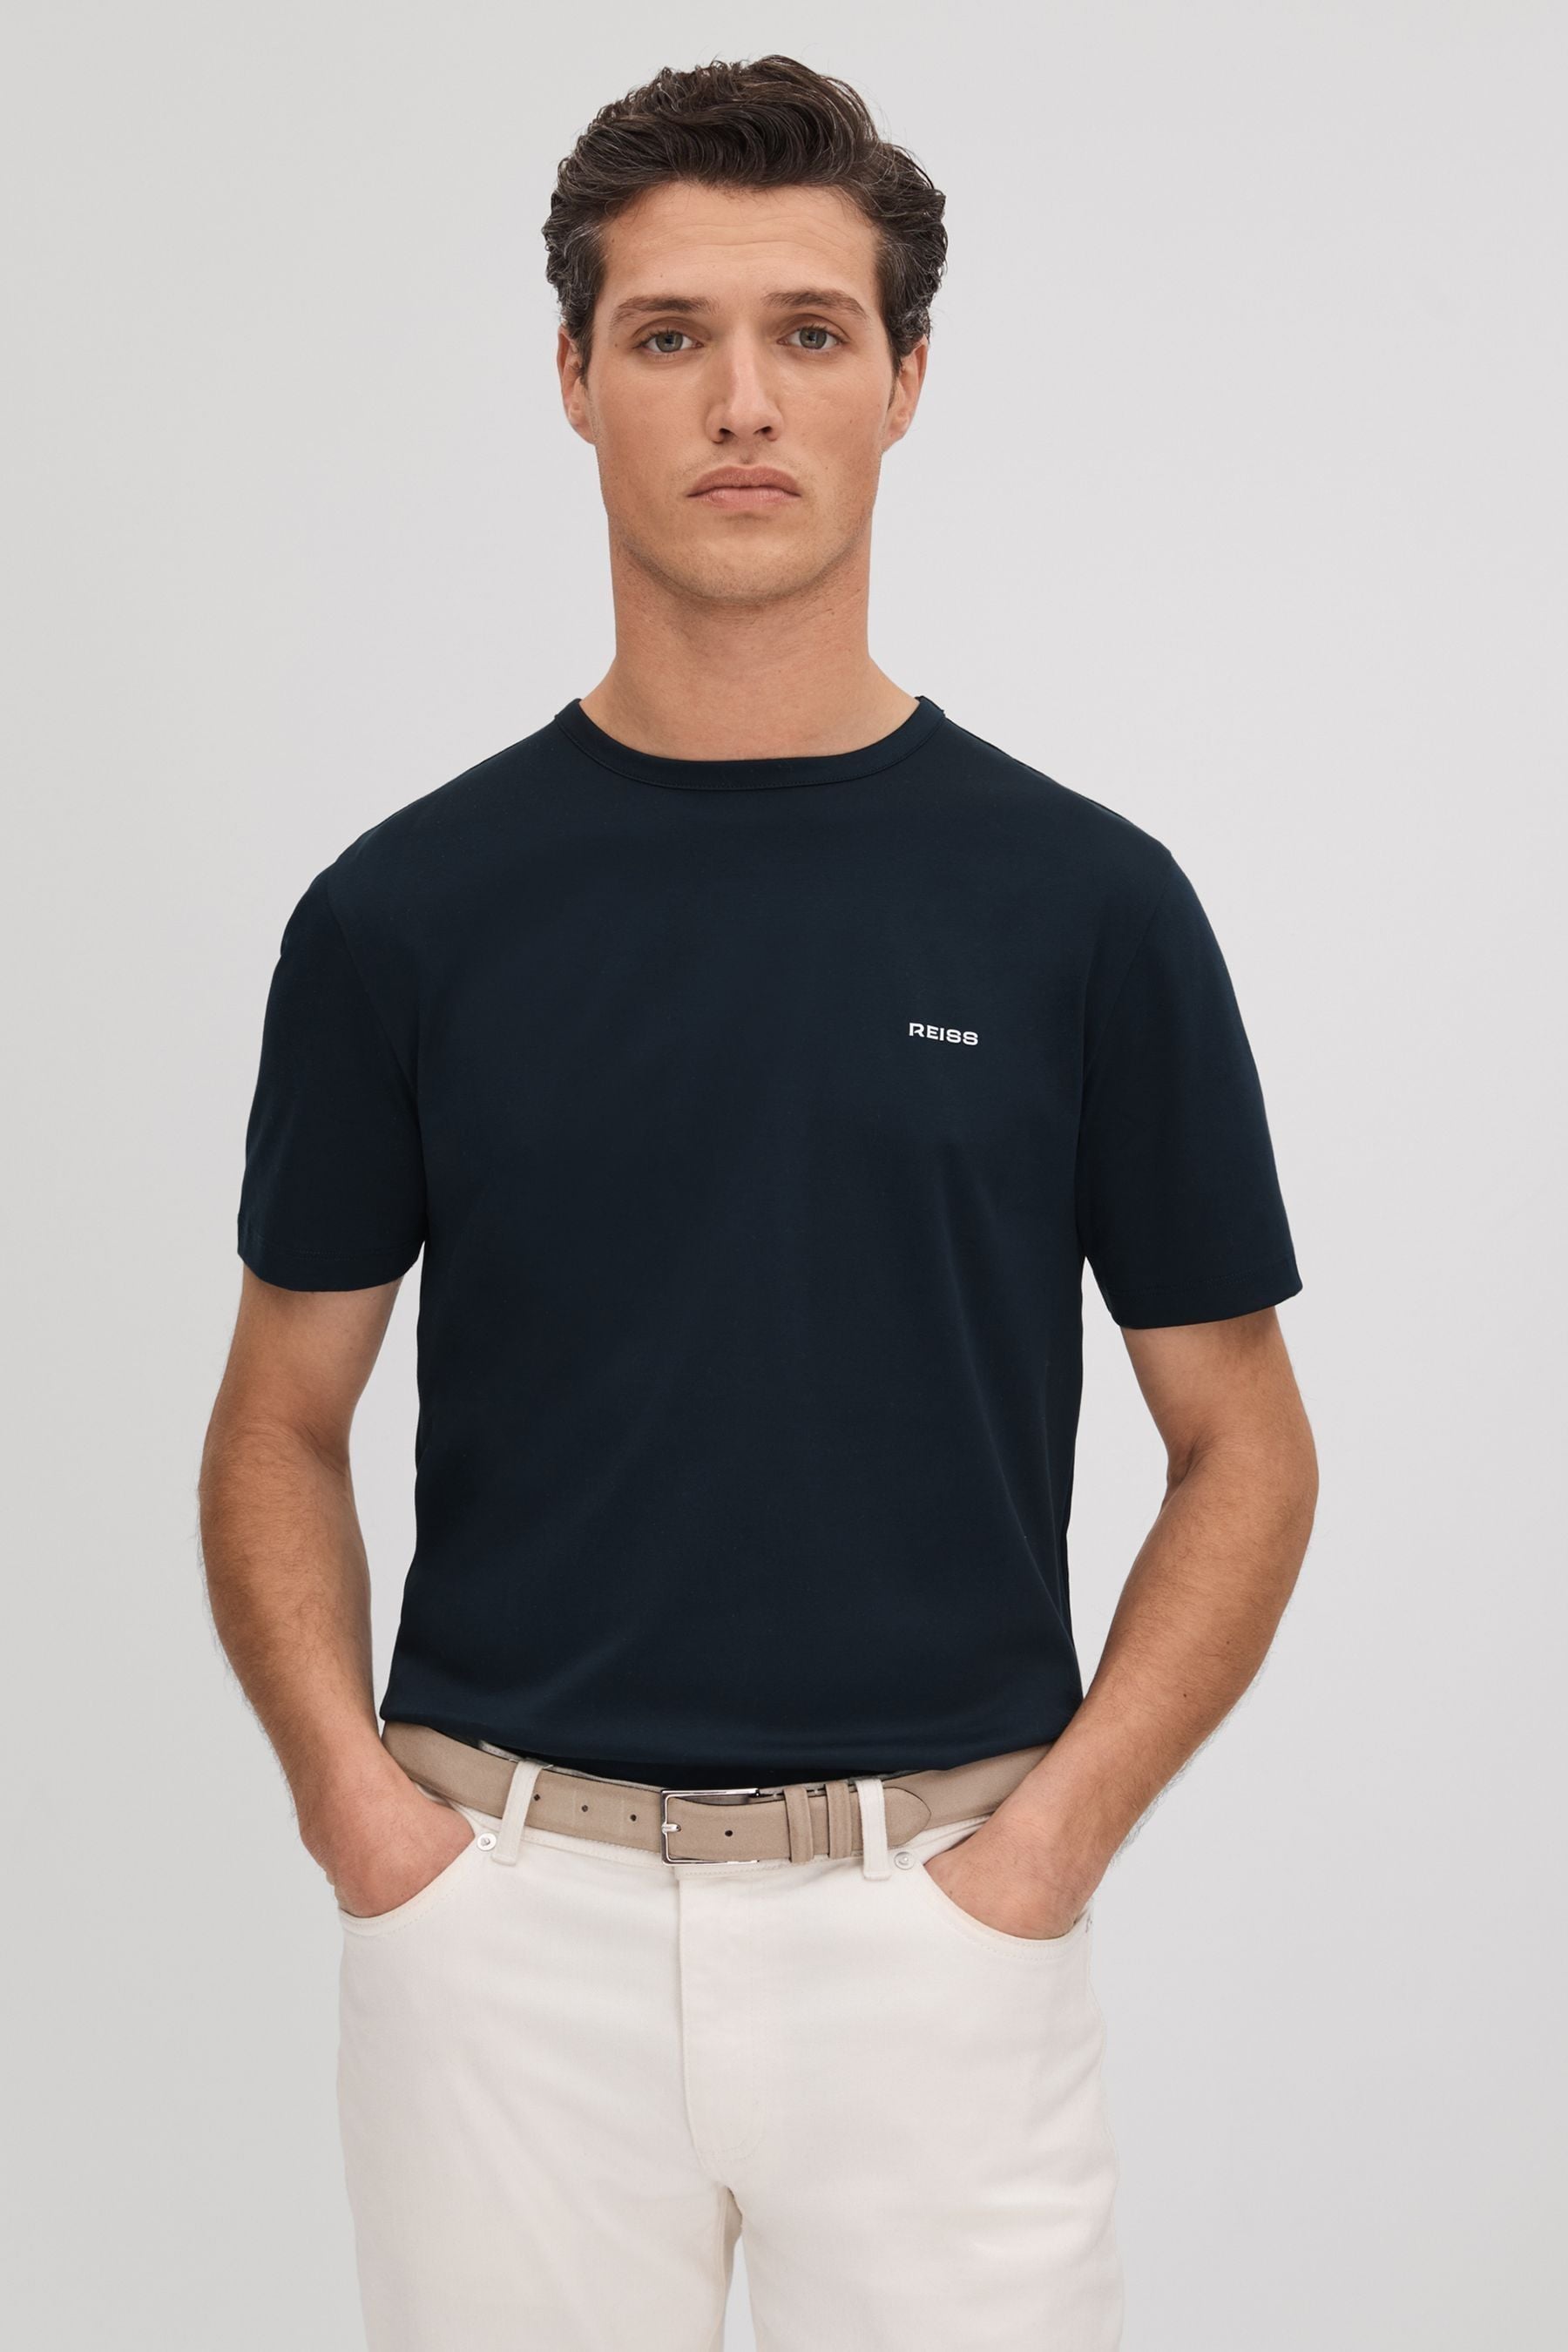 Reiss Russell - Navy Slim Fit Cotton Crew T-shirt, M